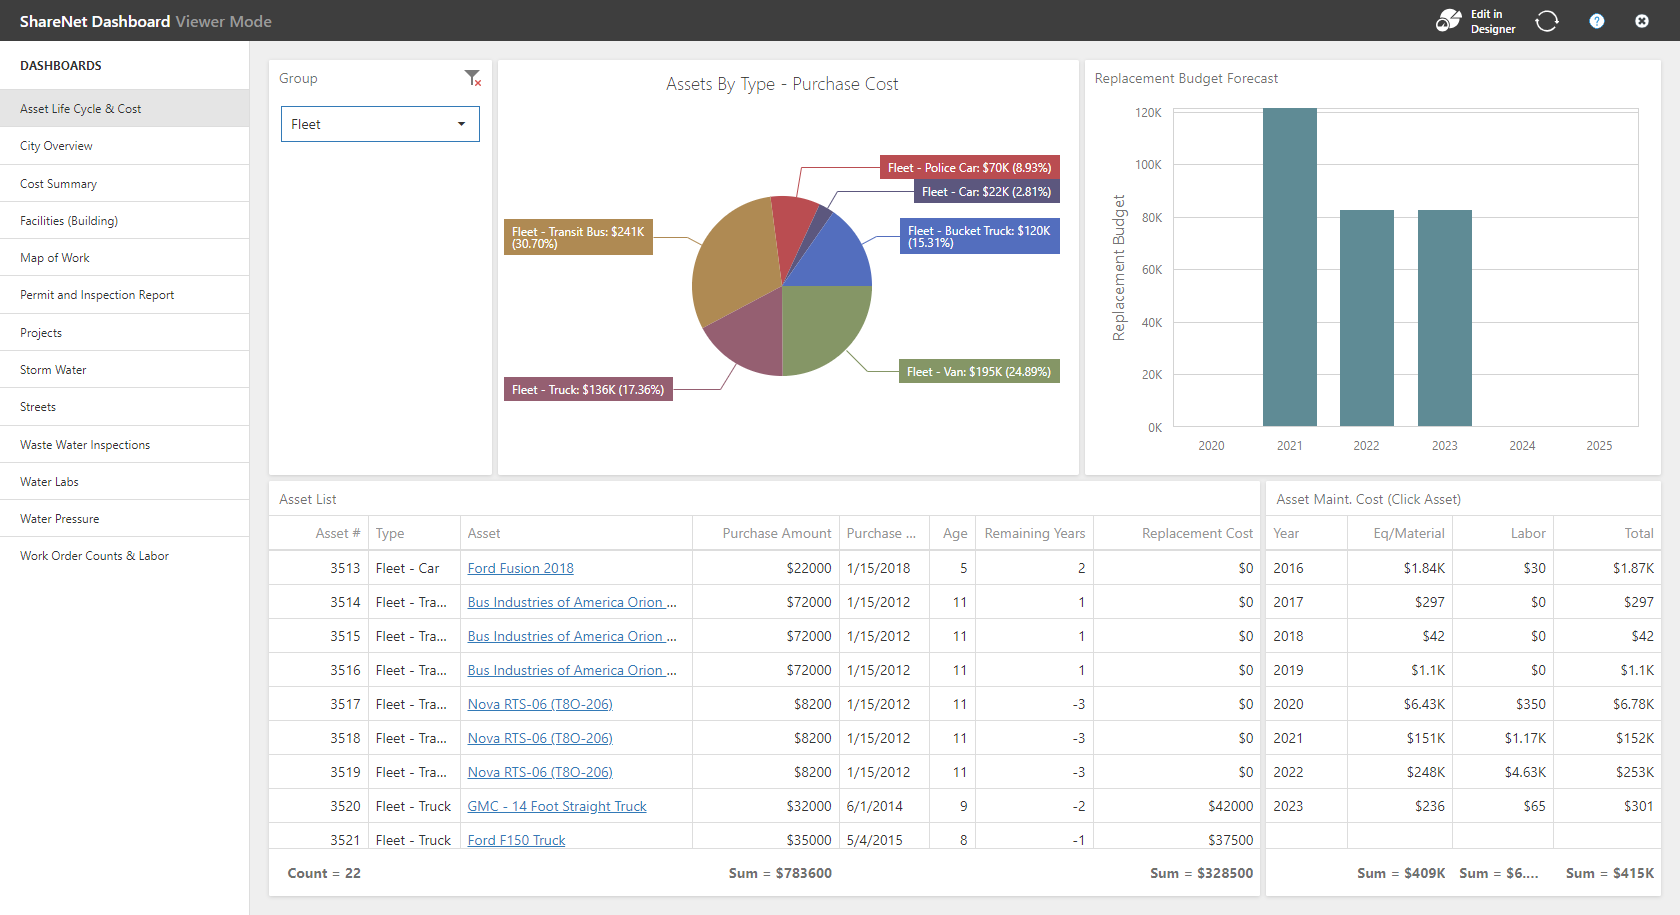 Asset Life Cycle & Cost Dashboard Analytics